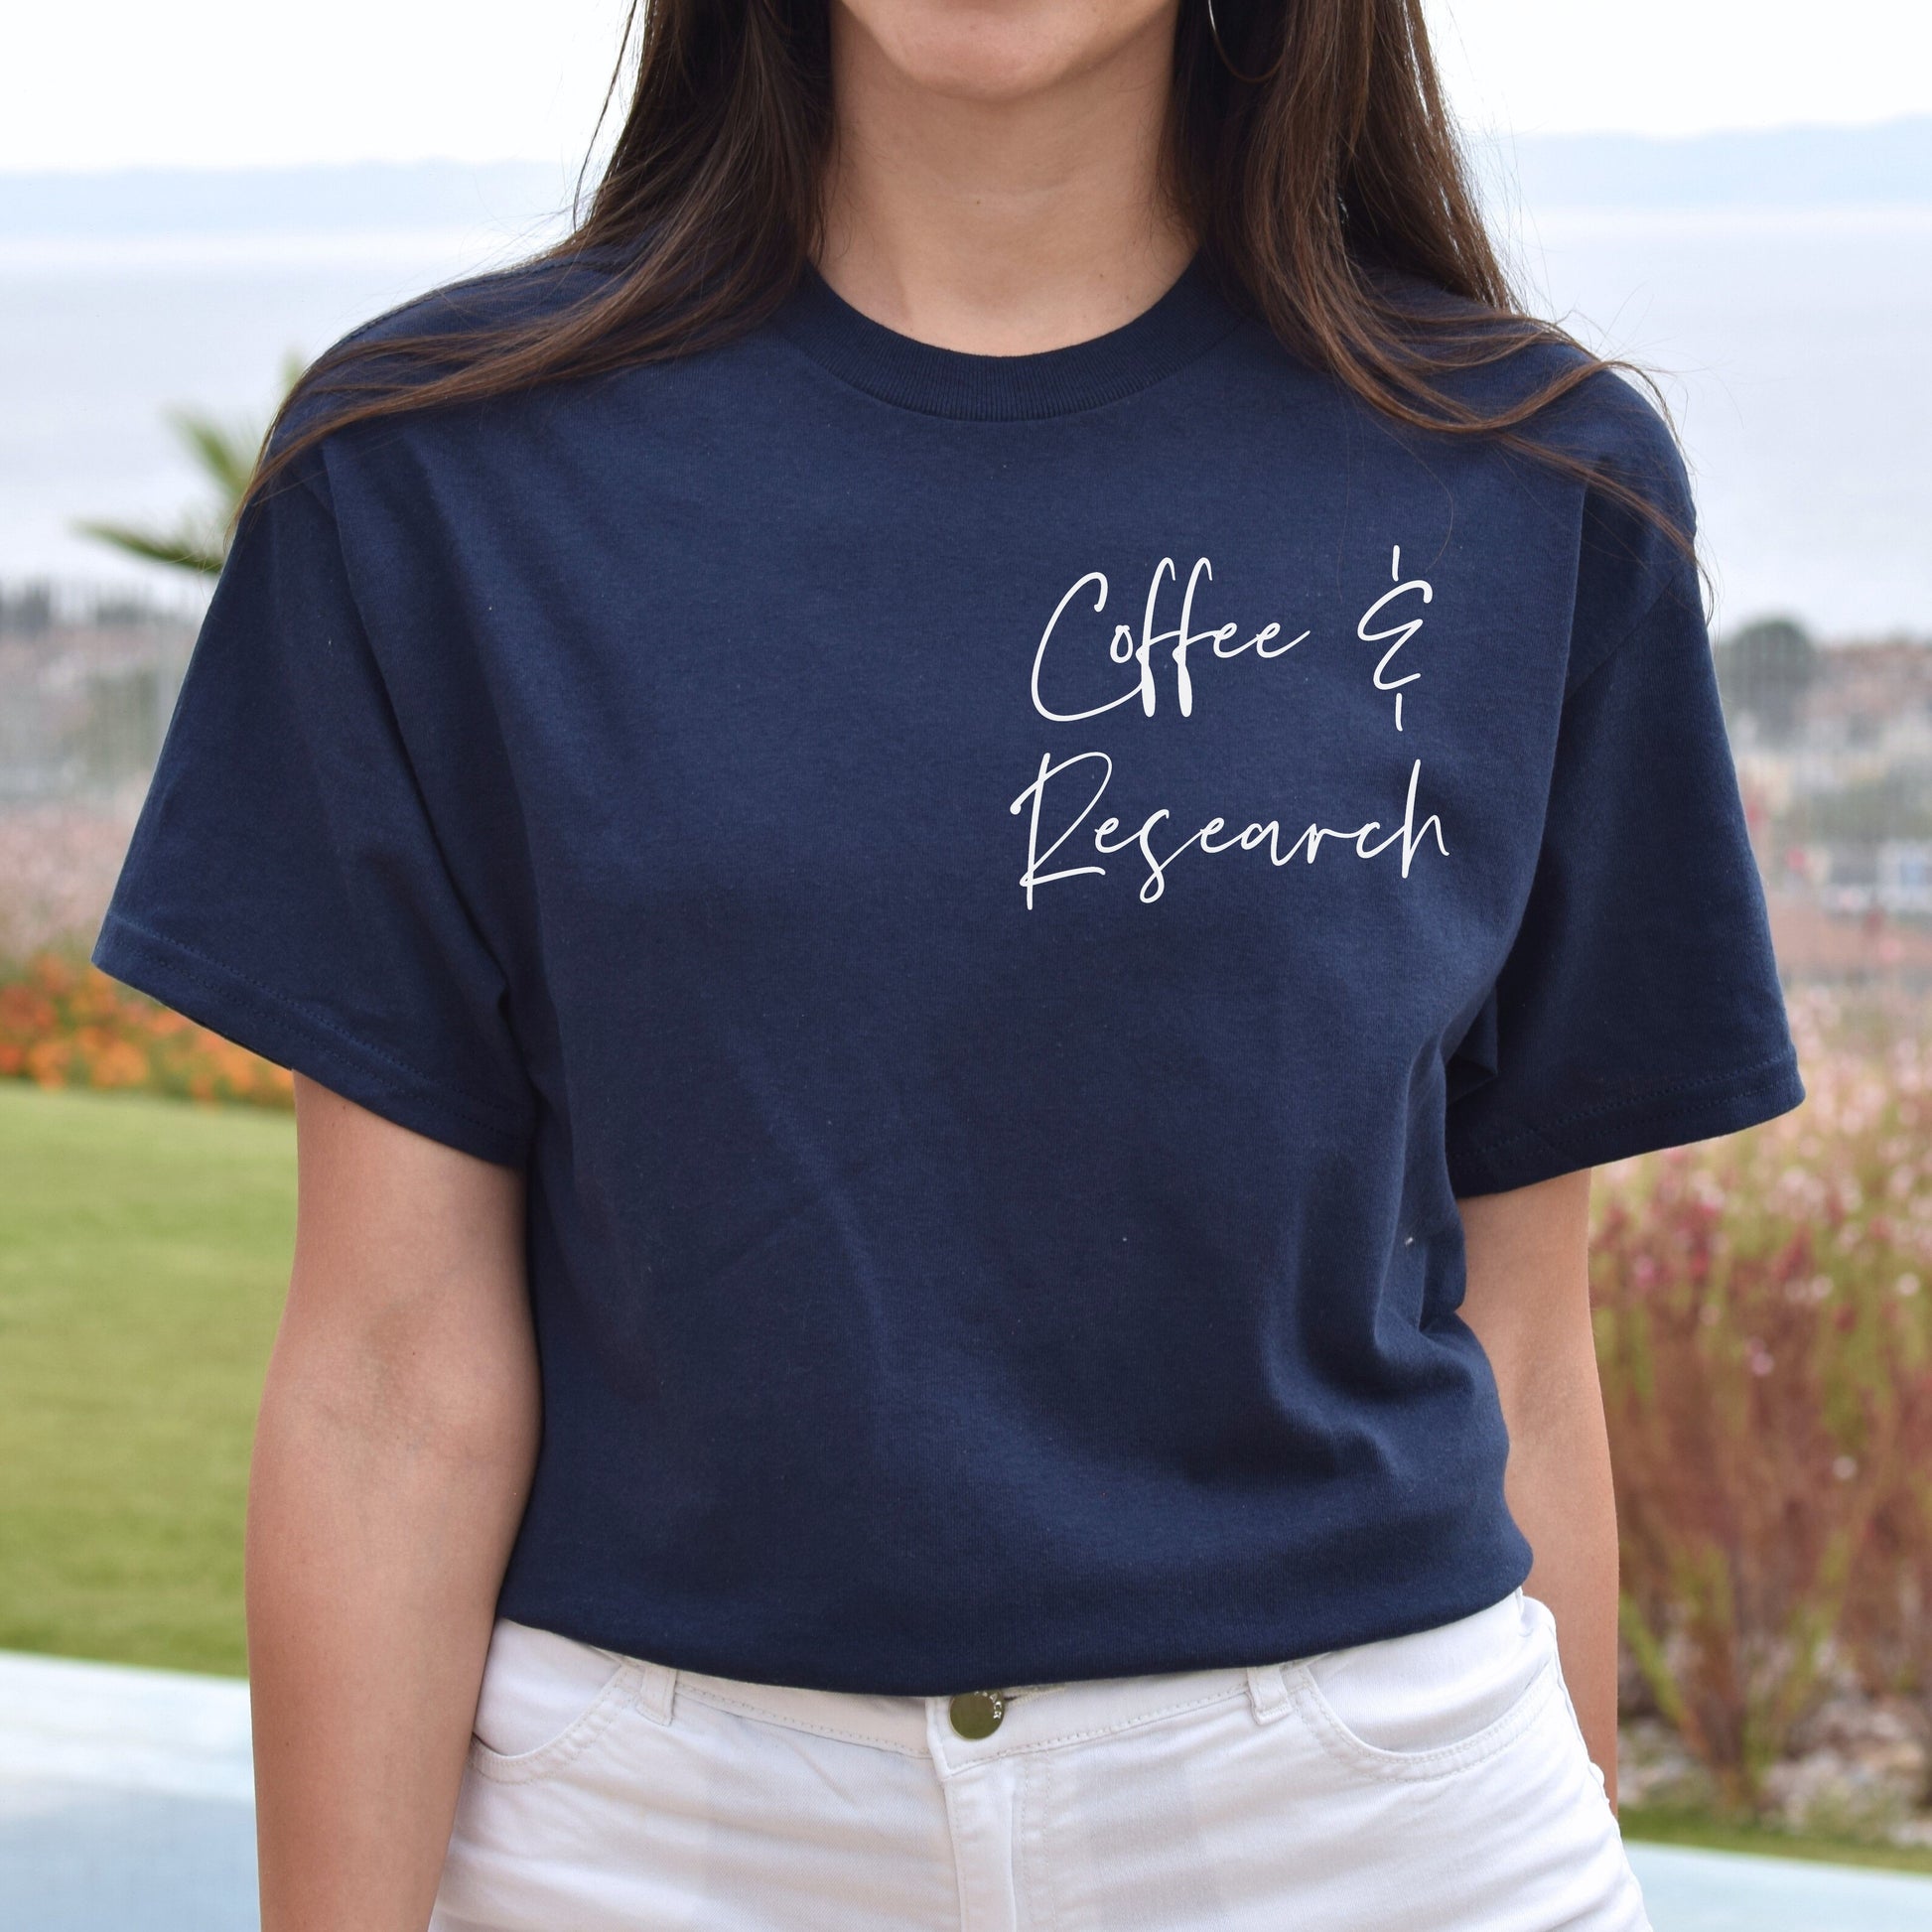 Coffee and research pocket Unisex T-shirt Medical research tee Black Navy Dark Heather-Navy-Family-Gift-Planet